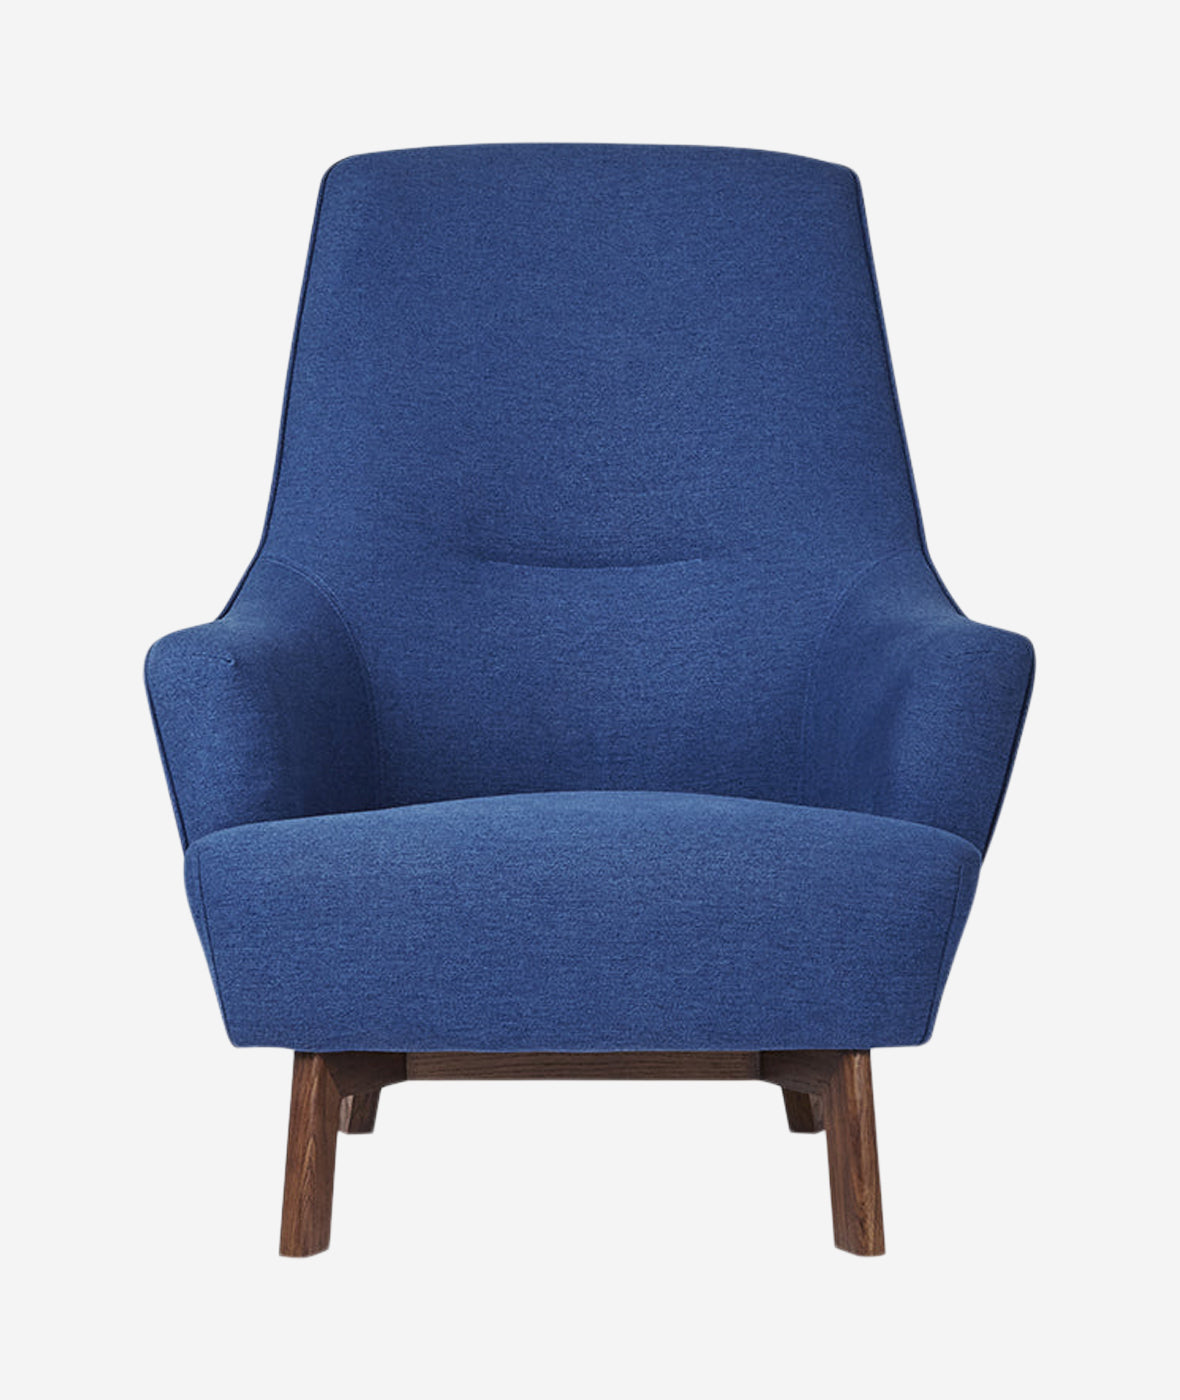 Hilary Chair - More Options